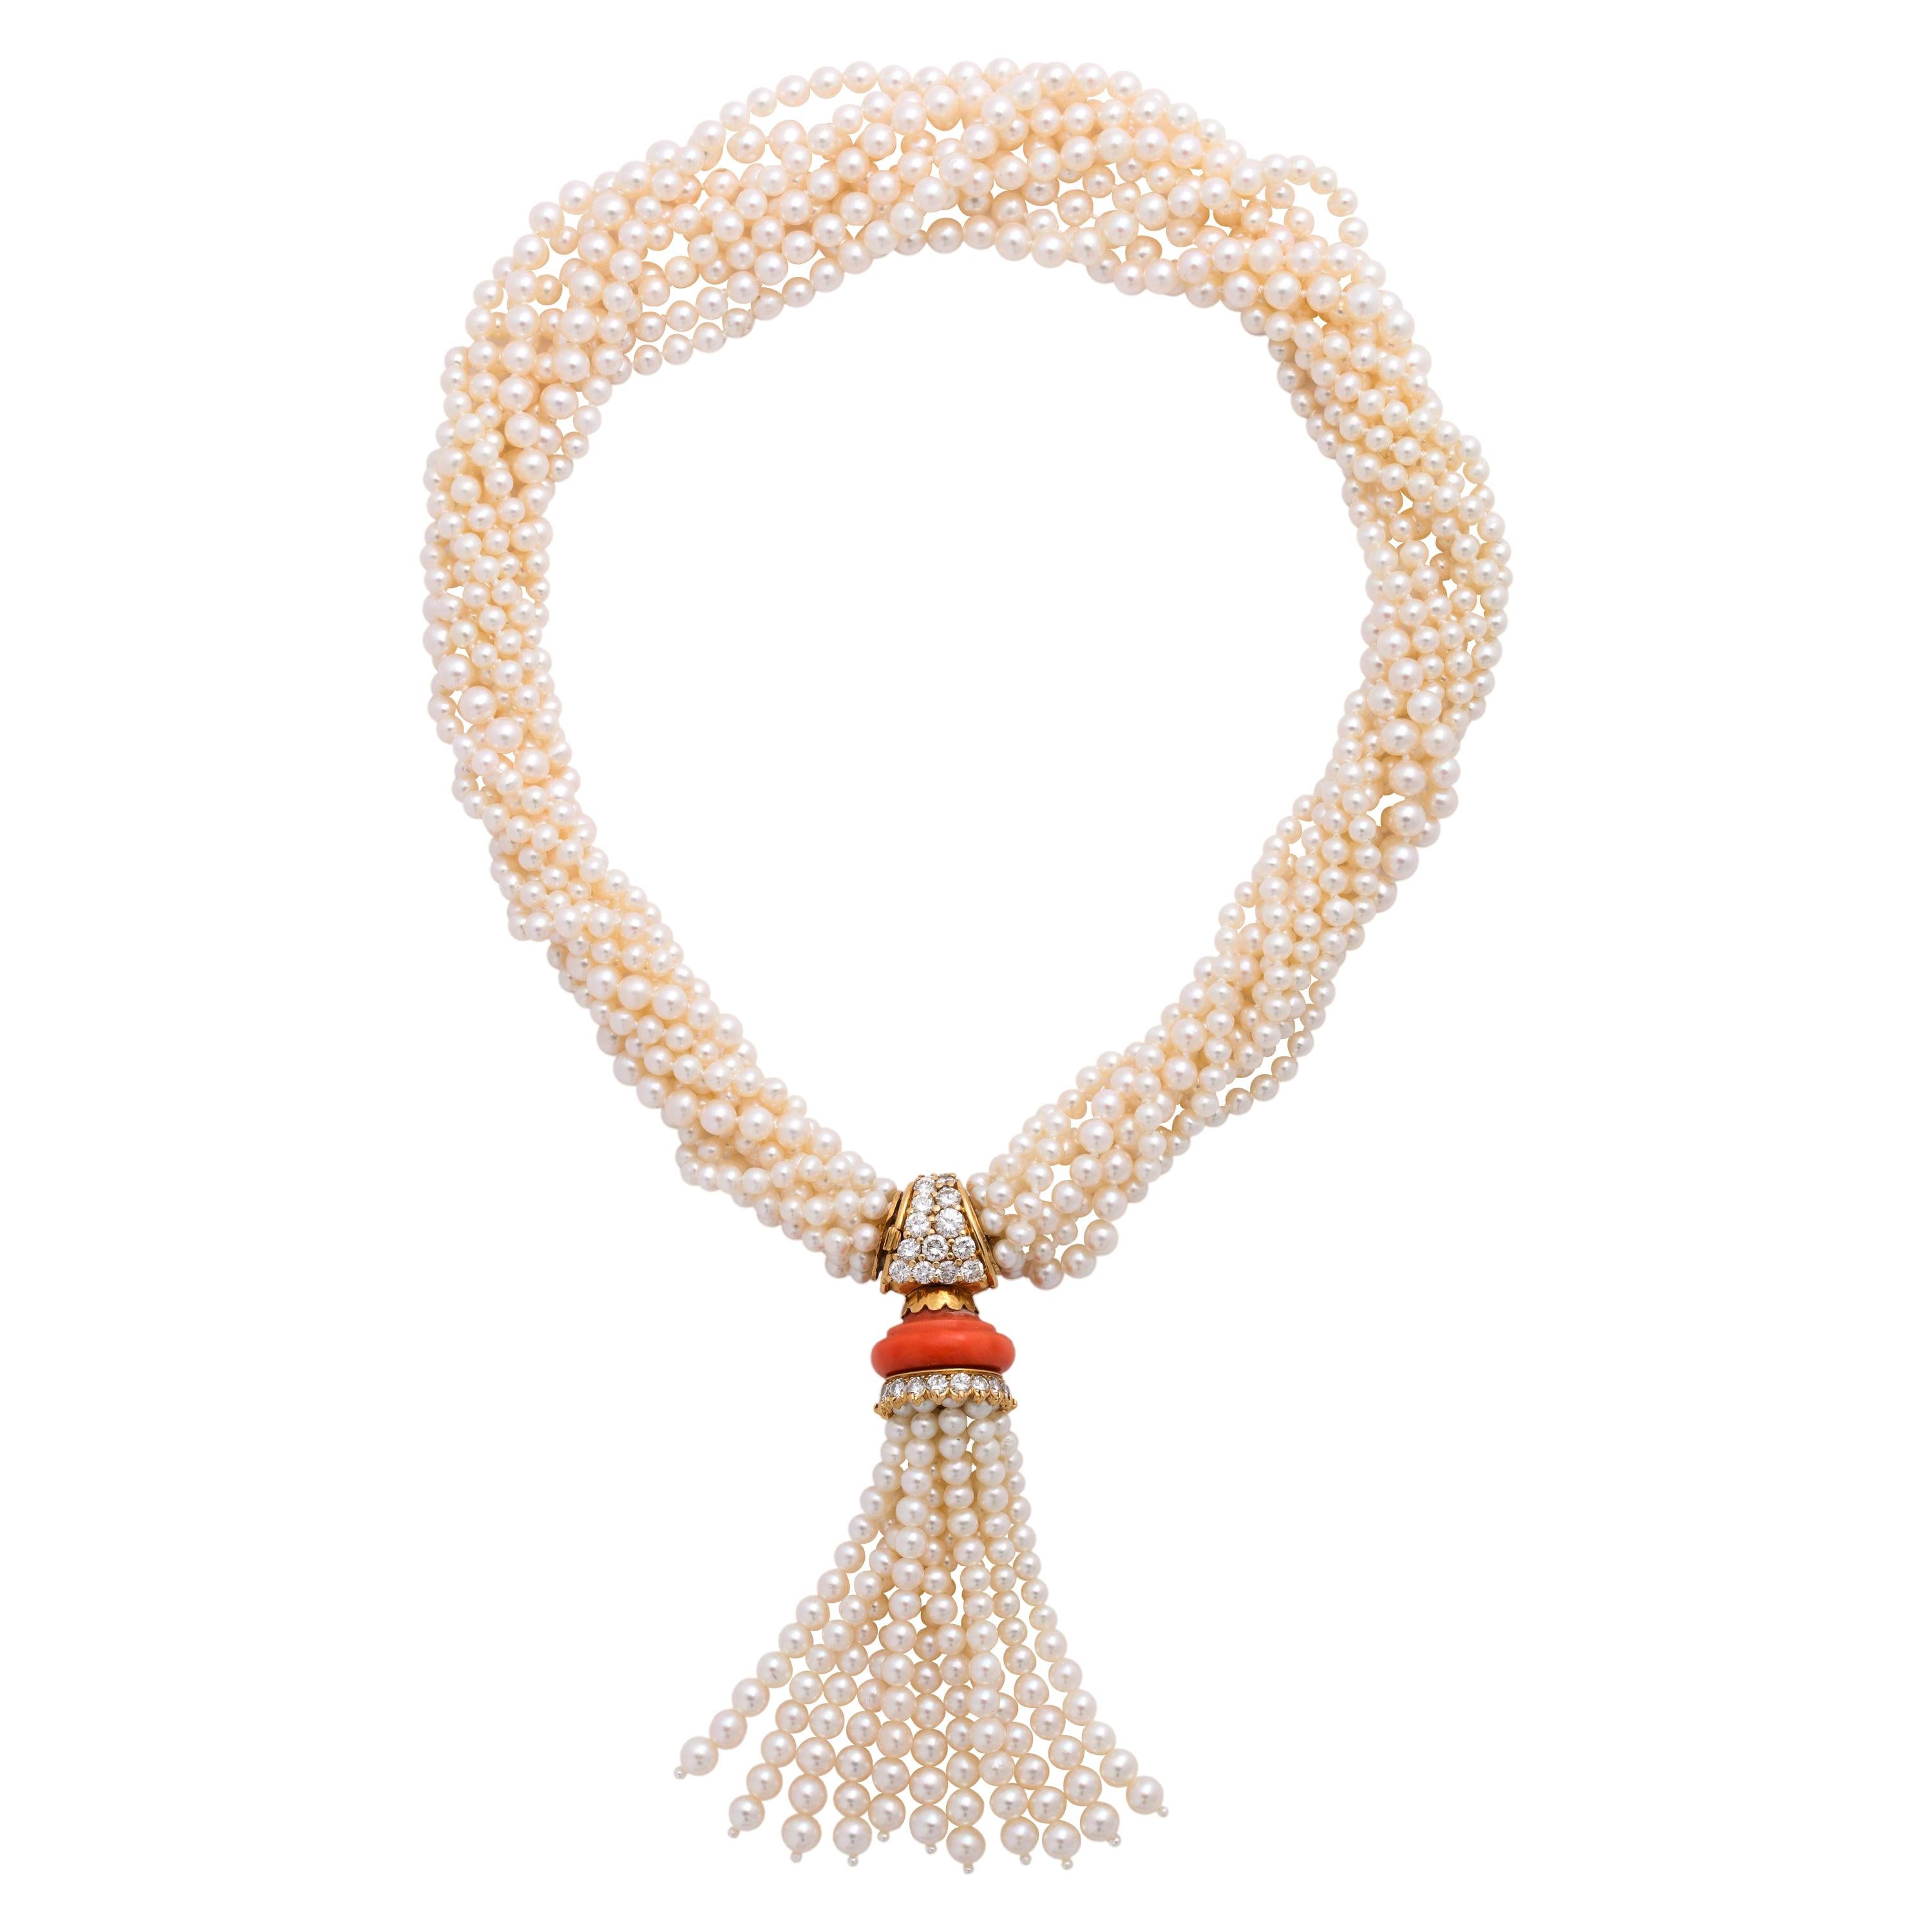 Boucheron 18 Karat Gold Cultured Pearl Coral and Diamond Necklace